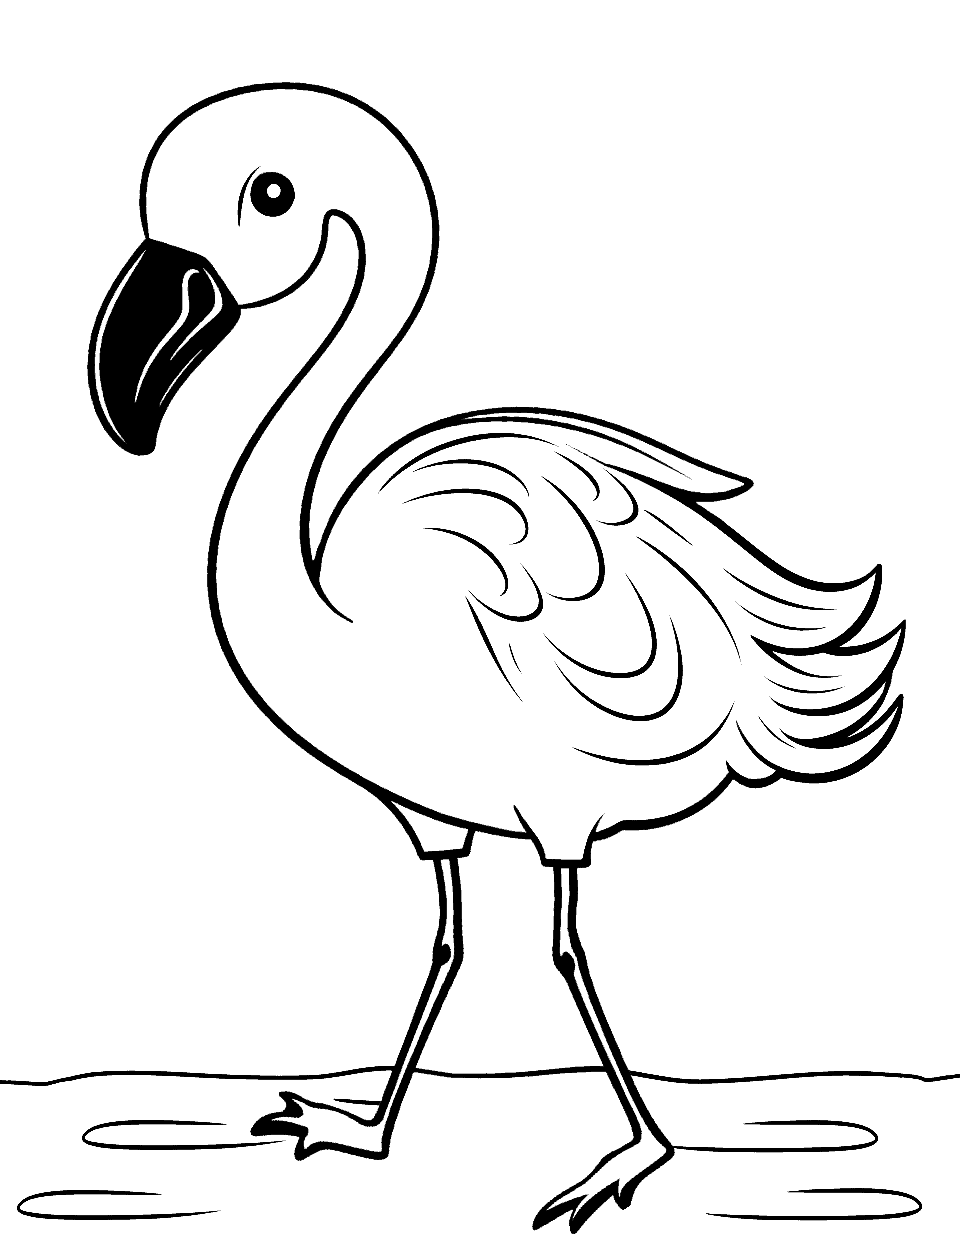 Baby Flamingo Learning to Walk Coloring Page - A baby flamingo awkwardly trying to walk, with fluffy feathers and a curious expression.